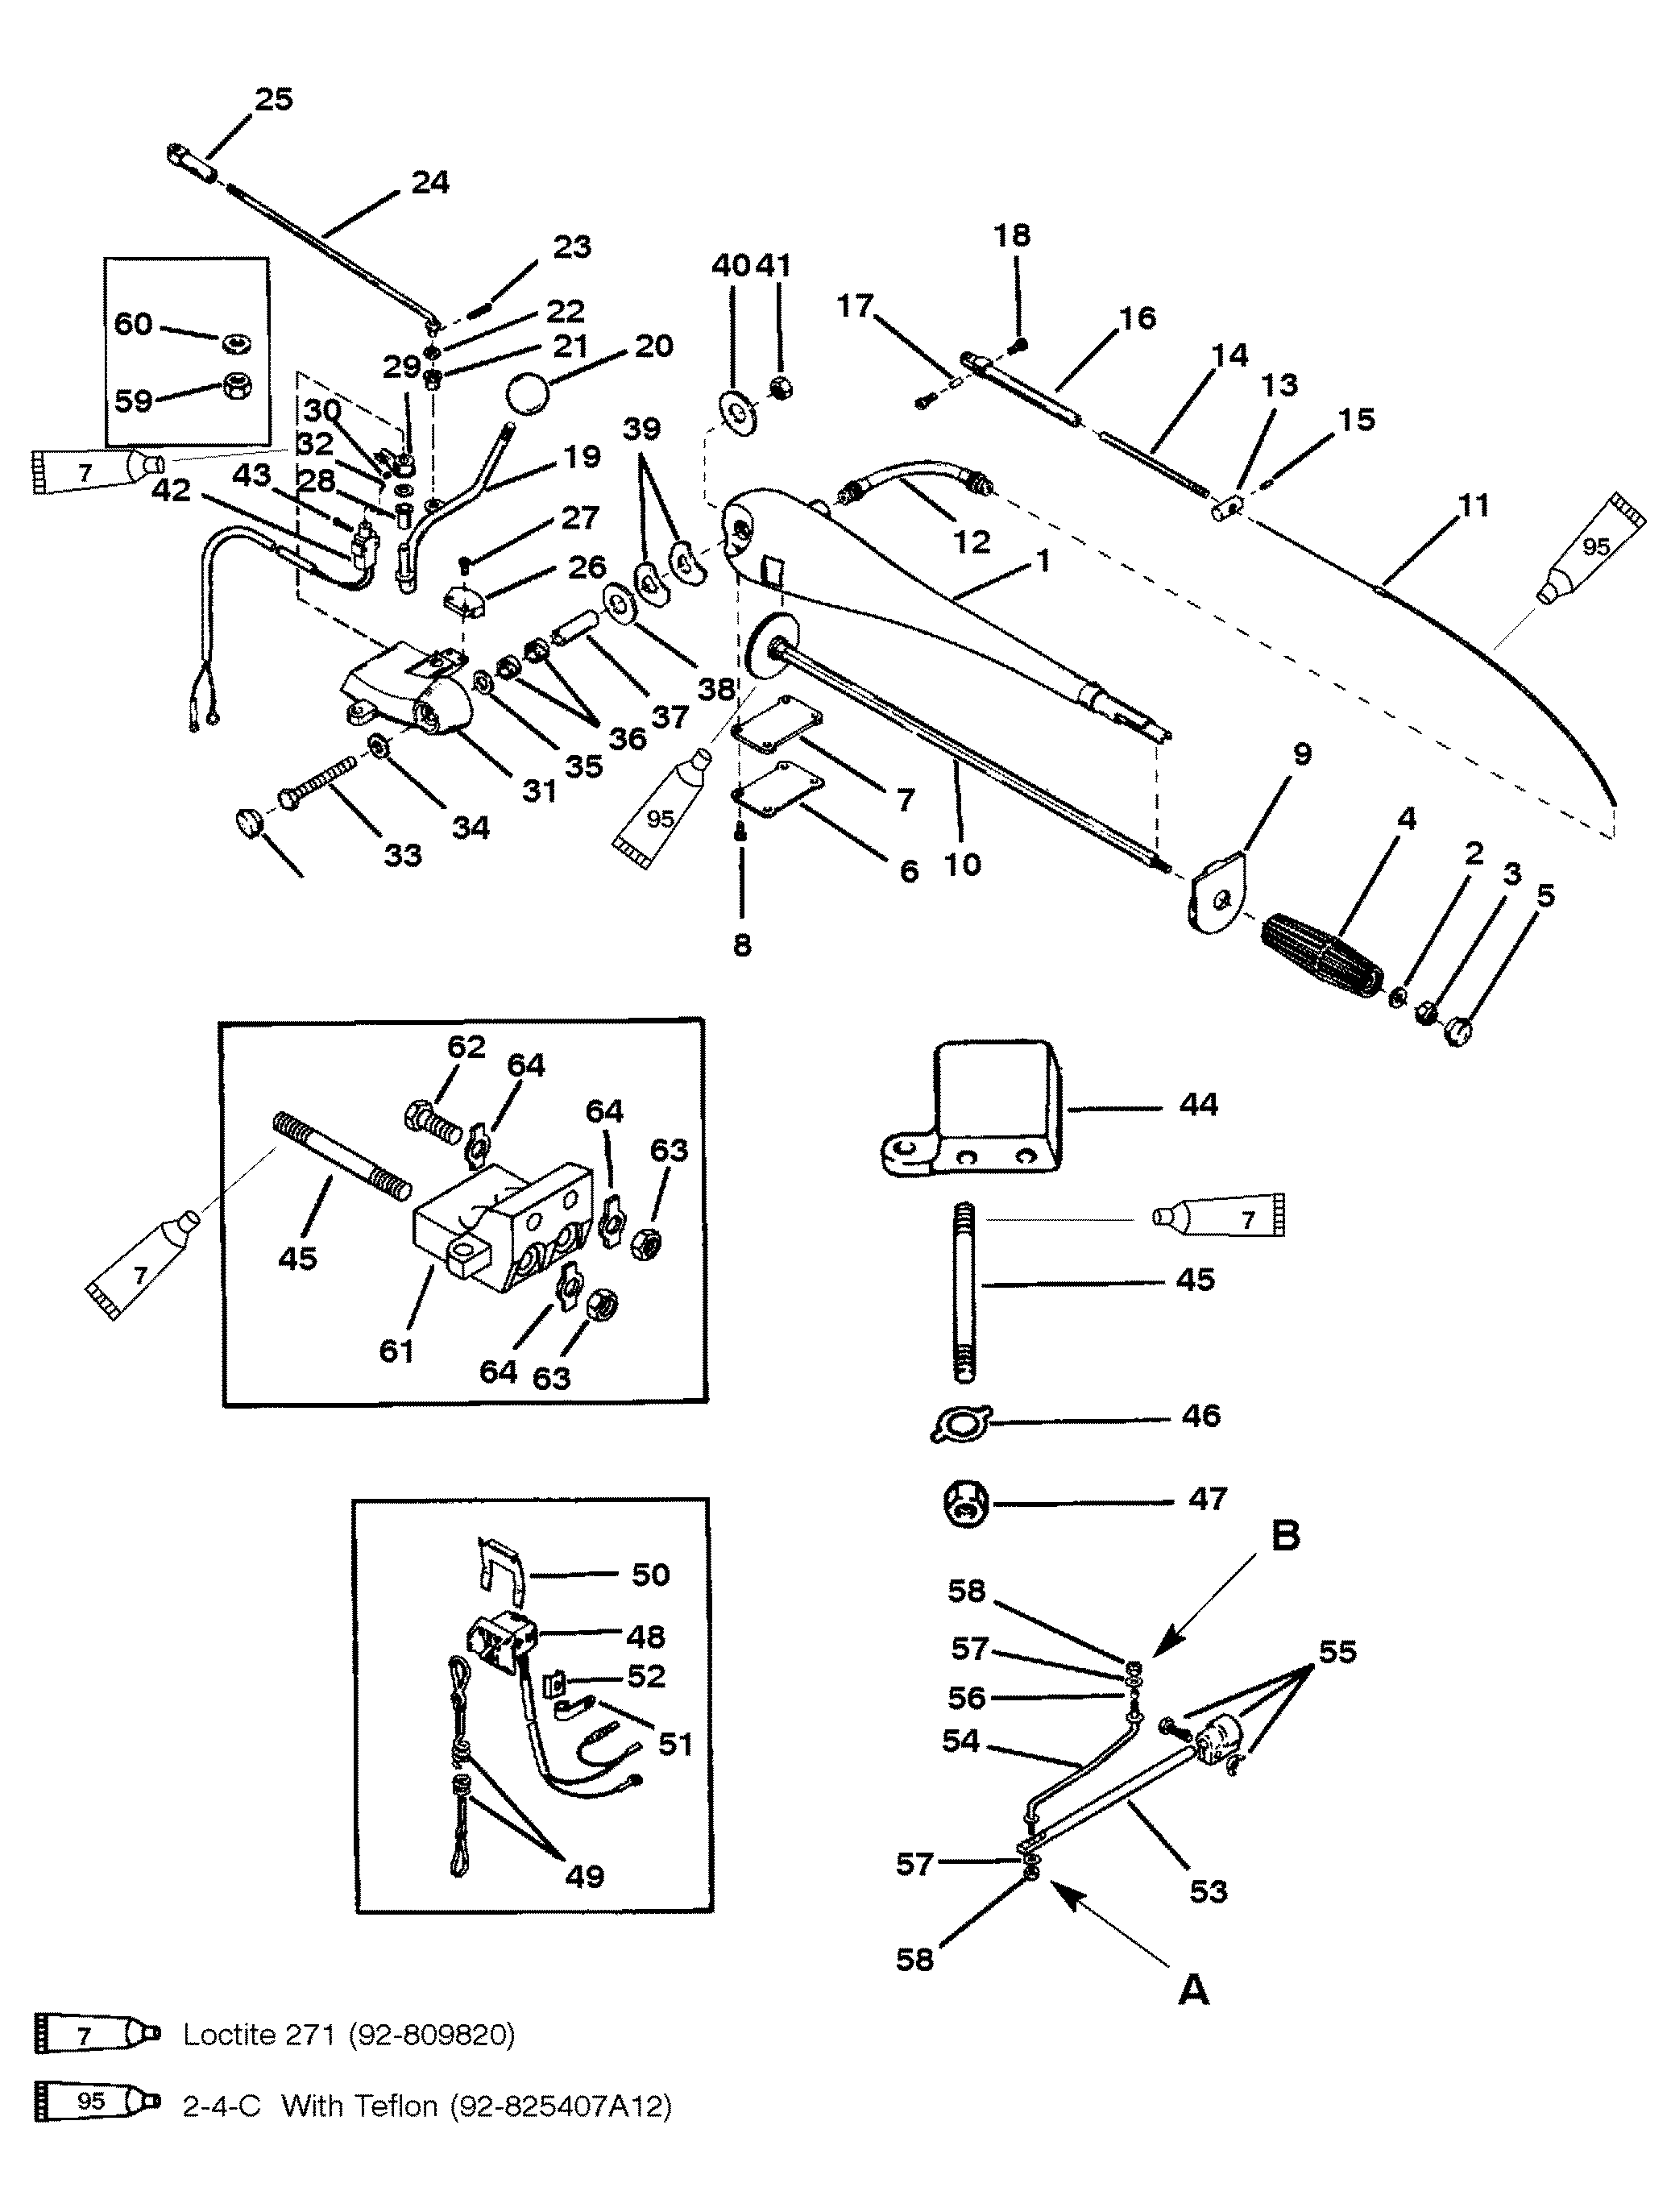 STEERING HANDLE ASSEMBLY